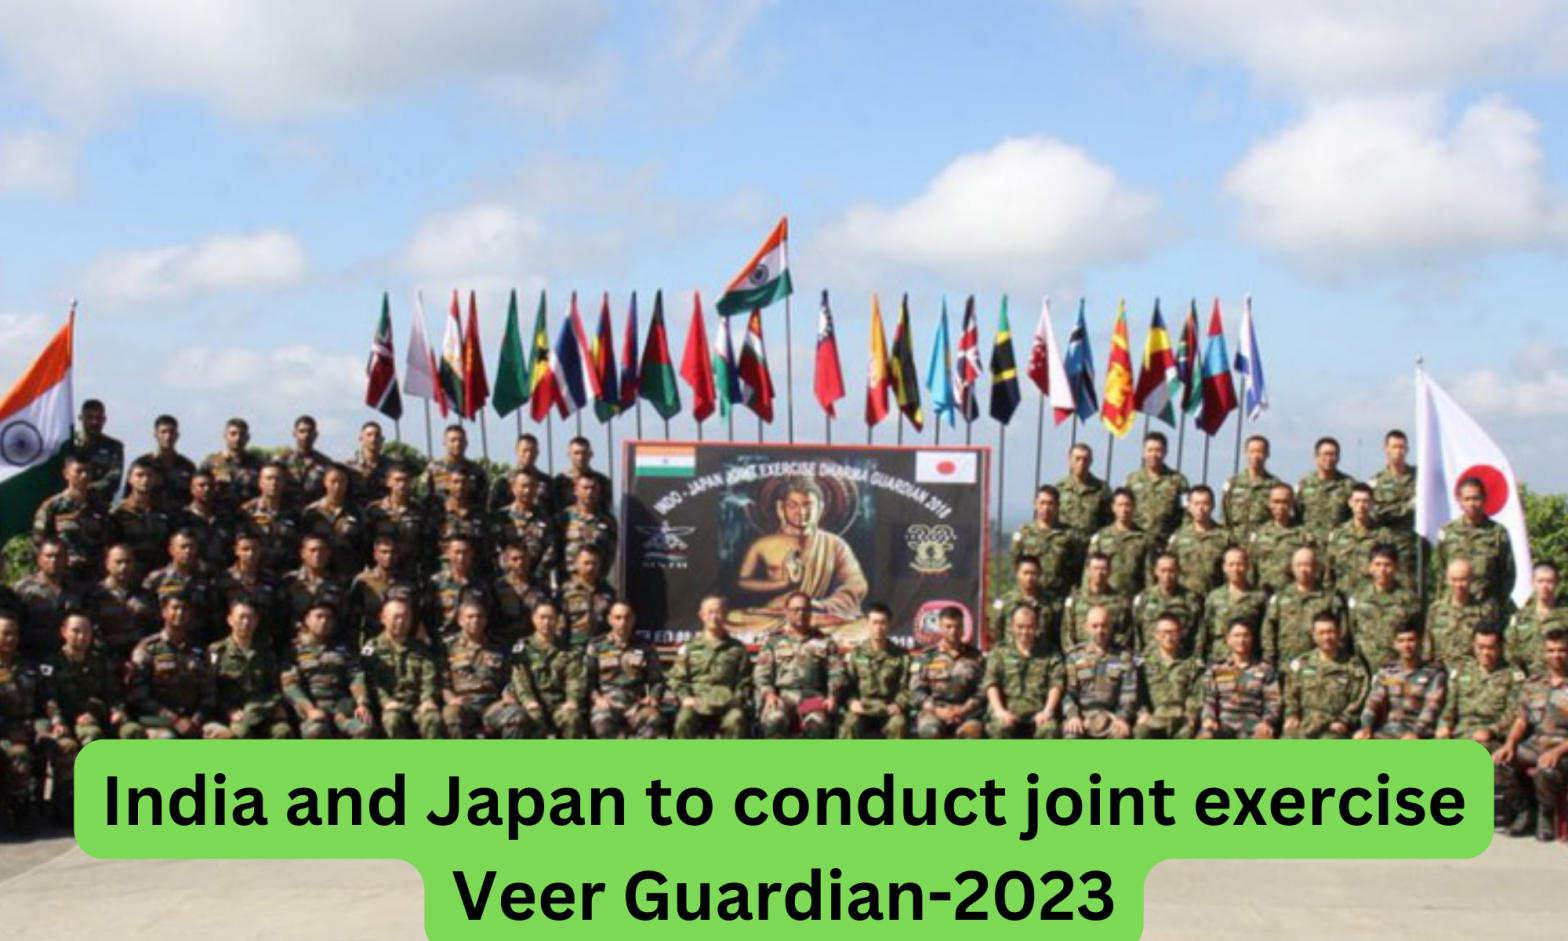 India and Japan to conduct joint exercise: Veer Guardian-2023